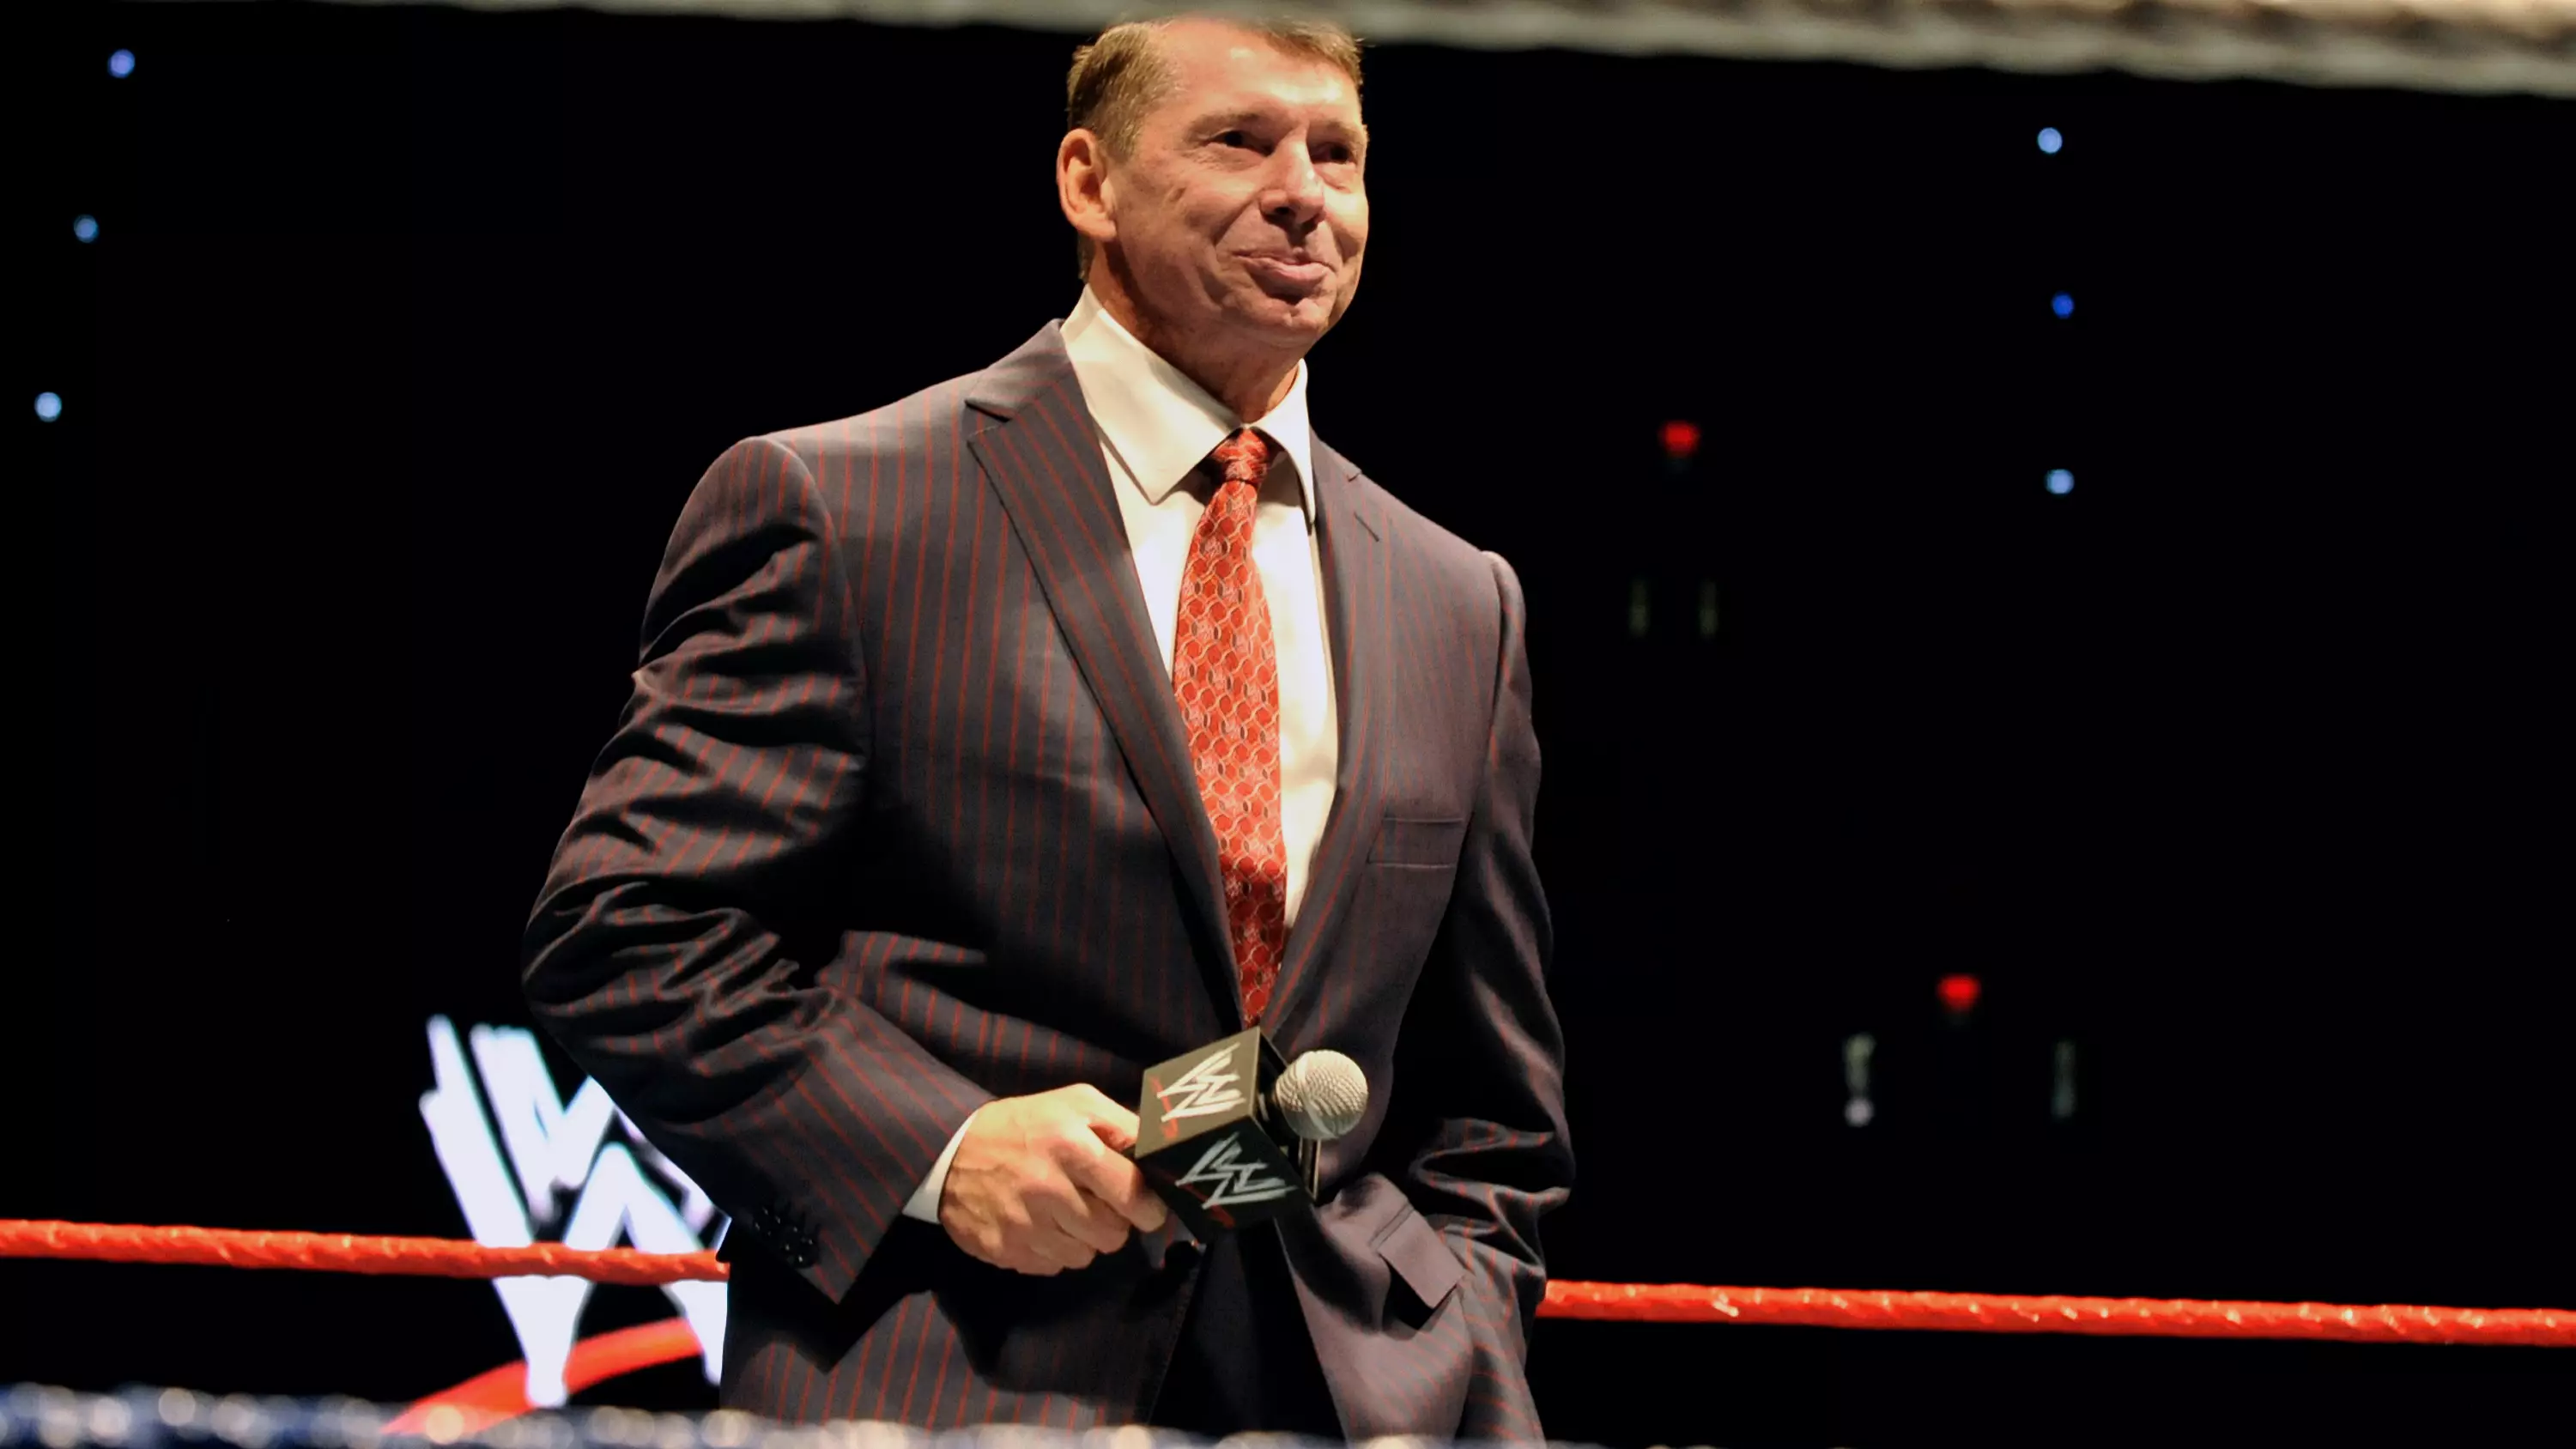 WWE Executive Vince McMahon Accused Of Sexually Assaulting Woman In 2006 